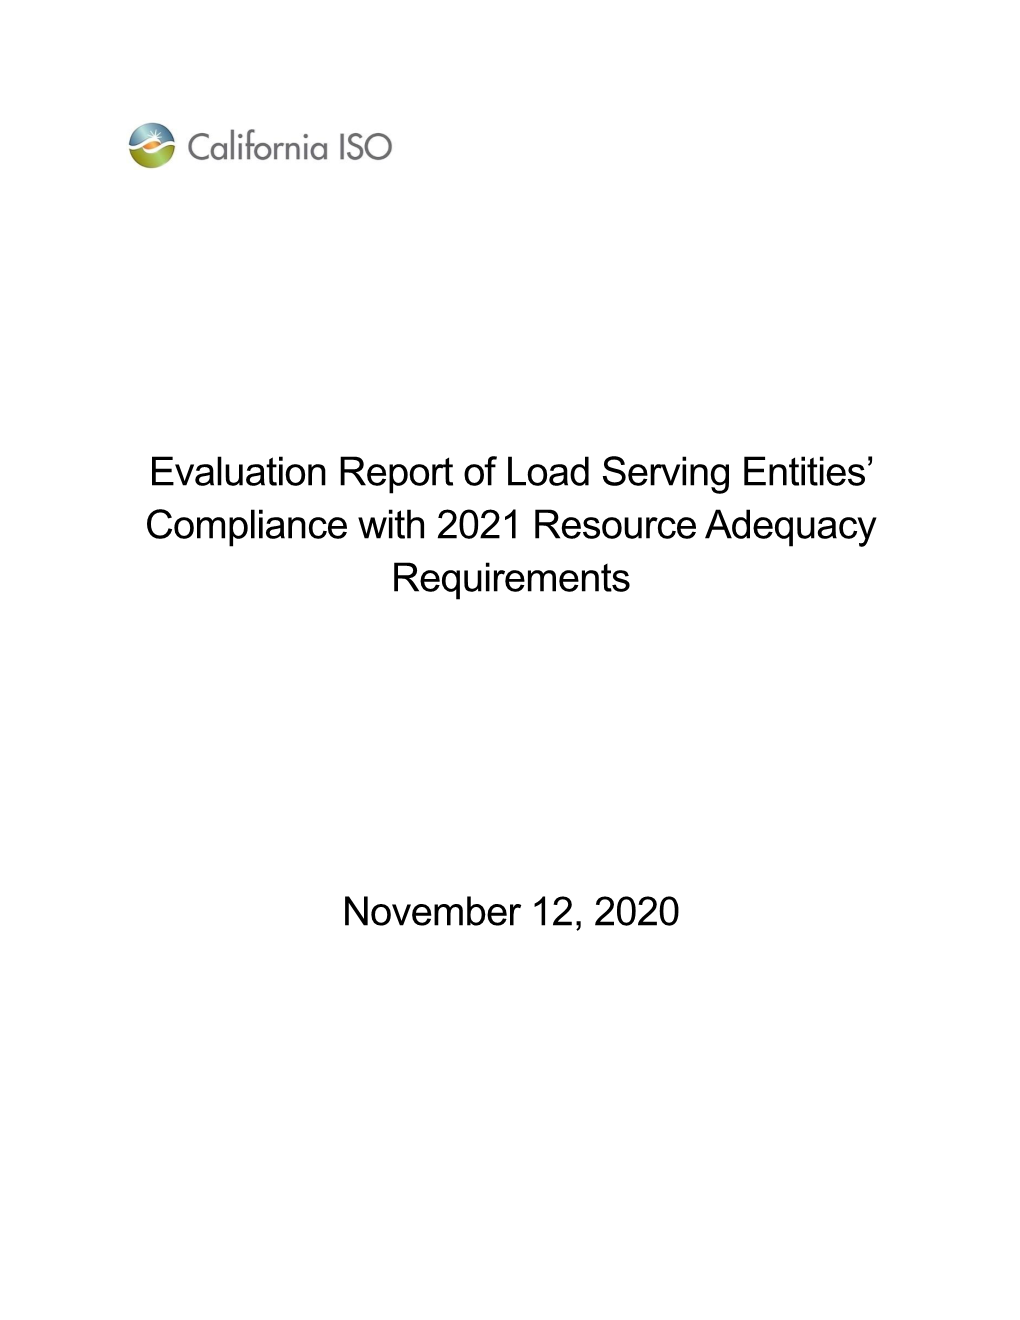 Evaluation Report of Load Serving Entities' Compliance with 2021 Resource Adequacy Requirements November 12, 2020